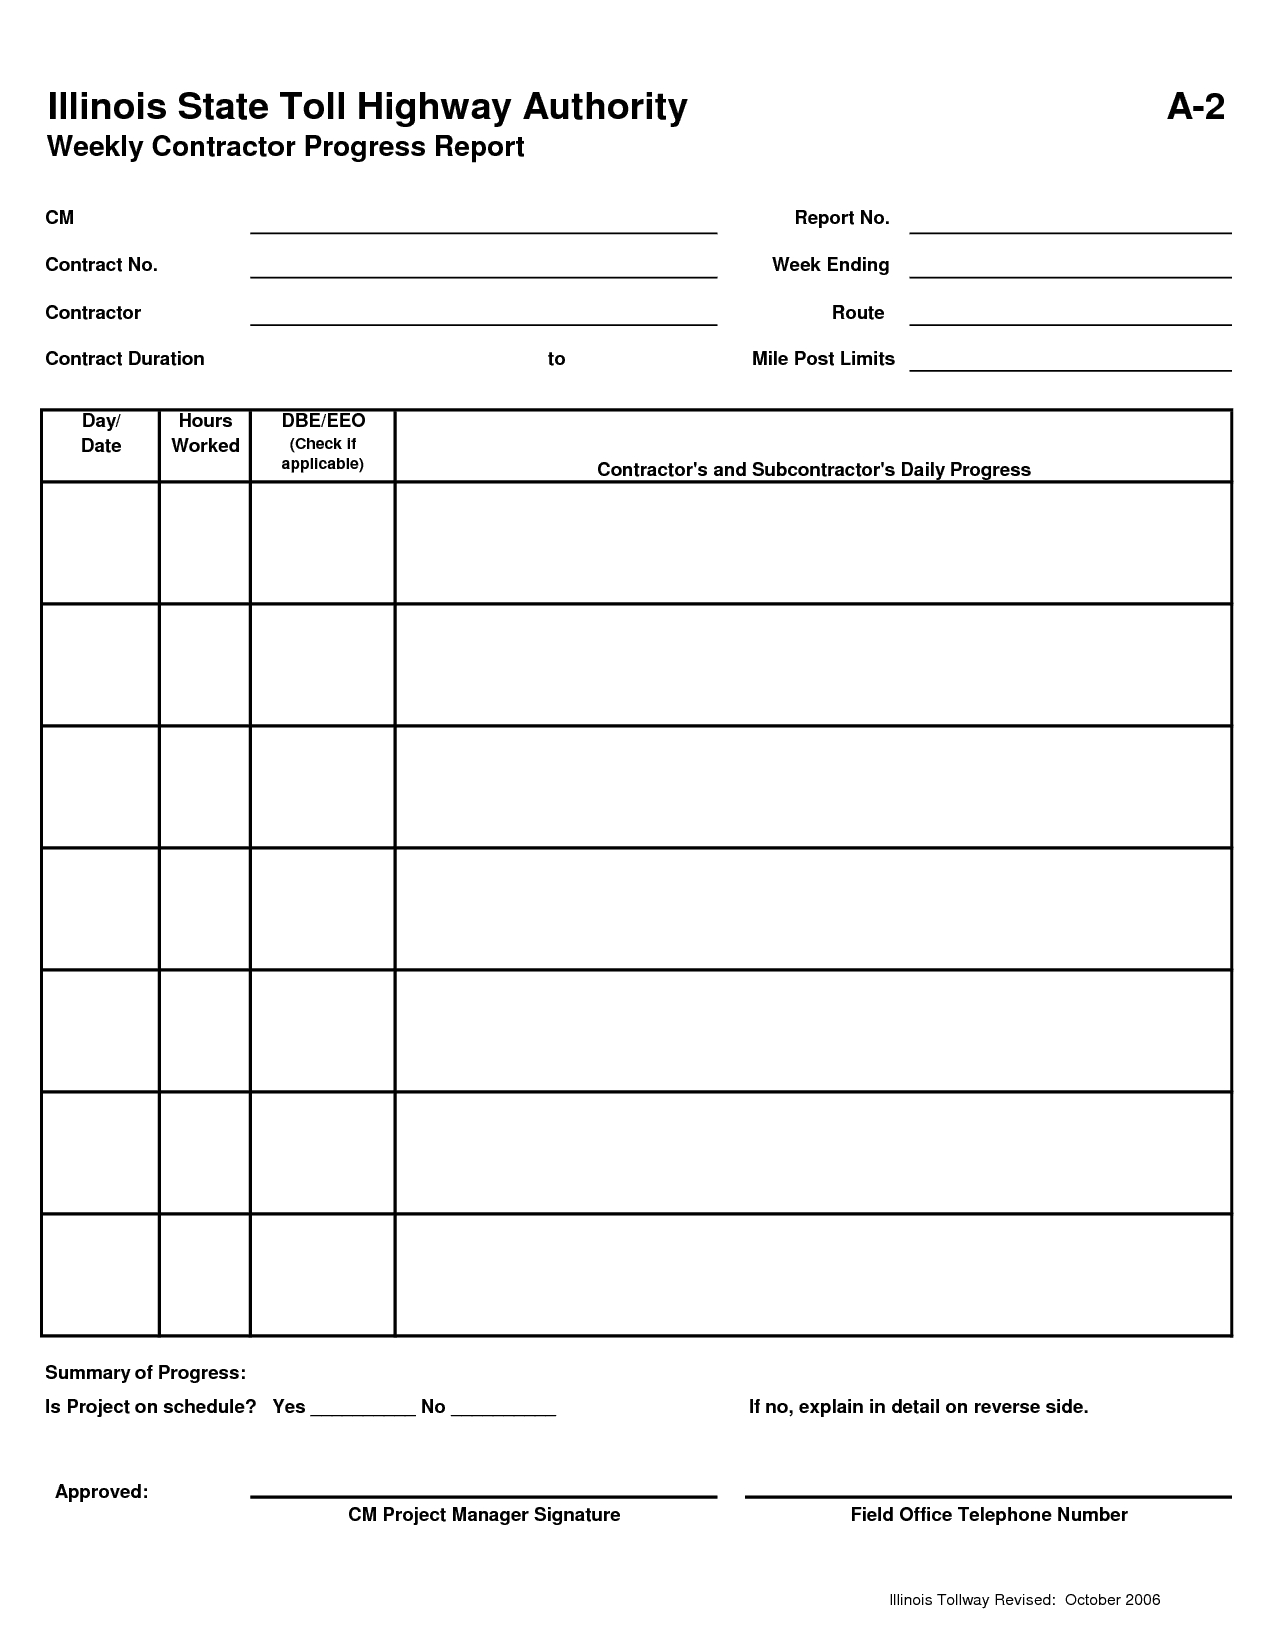 Bookkeeping Eadsheet For Small Business And Gas Station With Sales Manager Monthly Report Templates